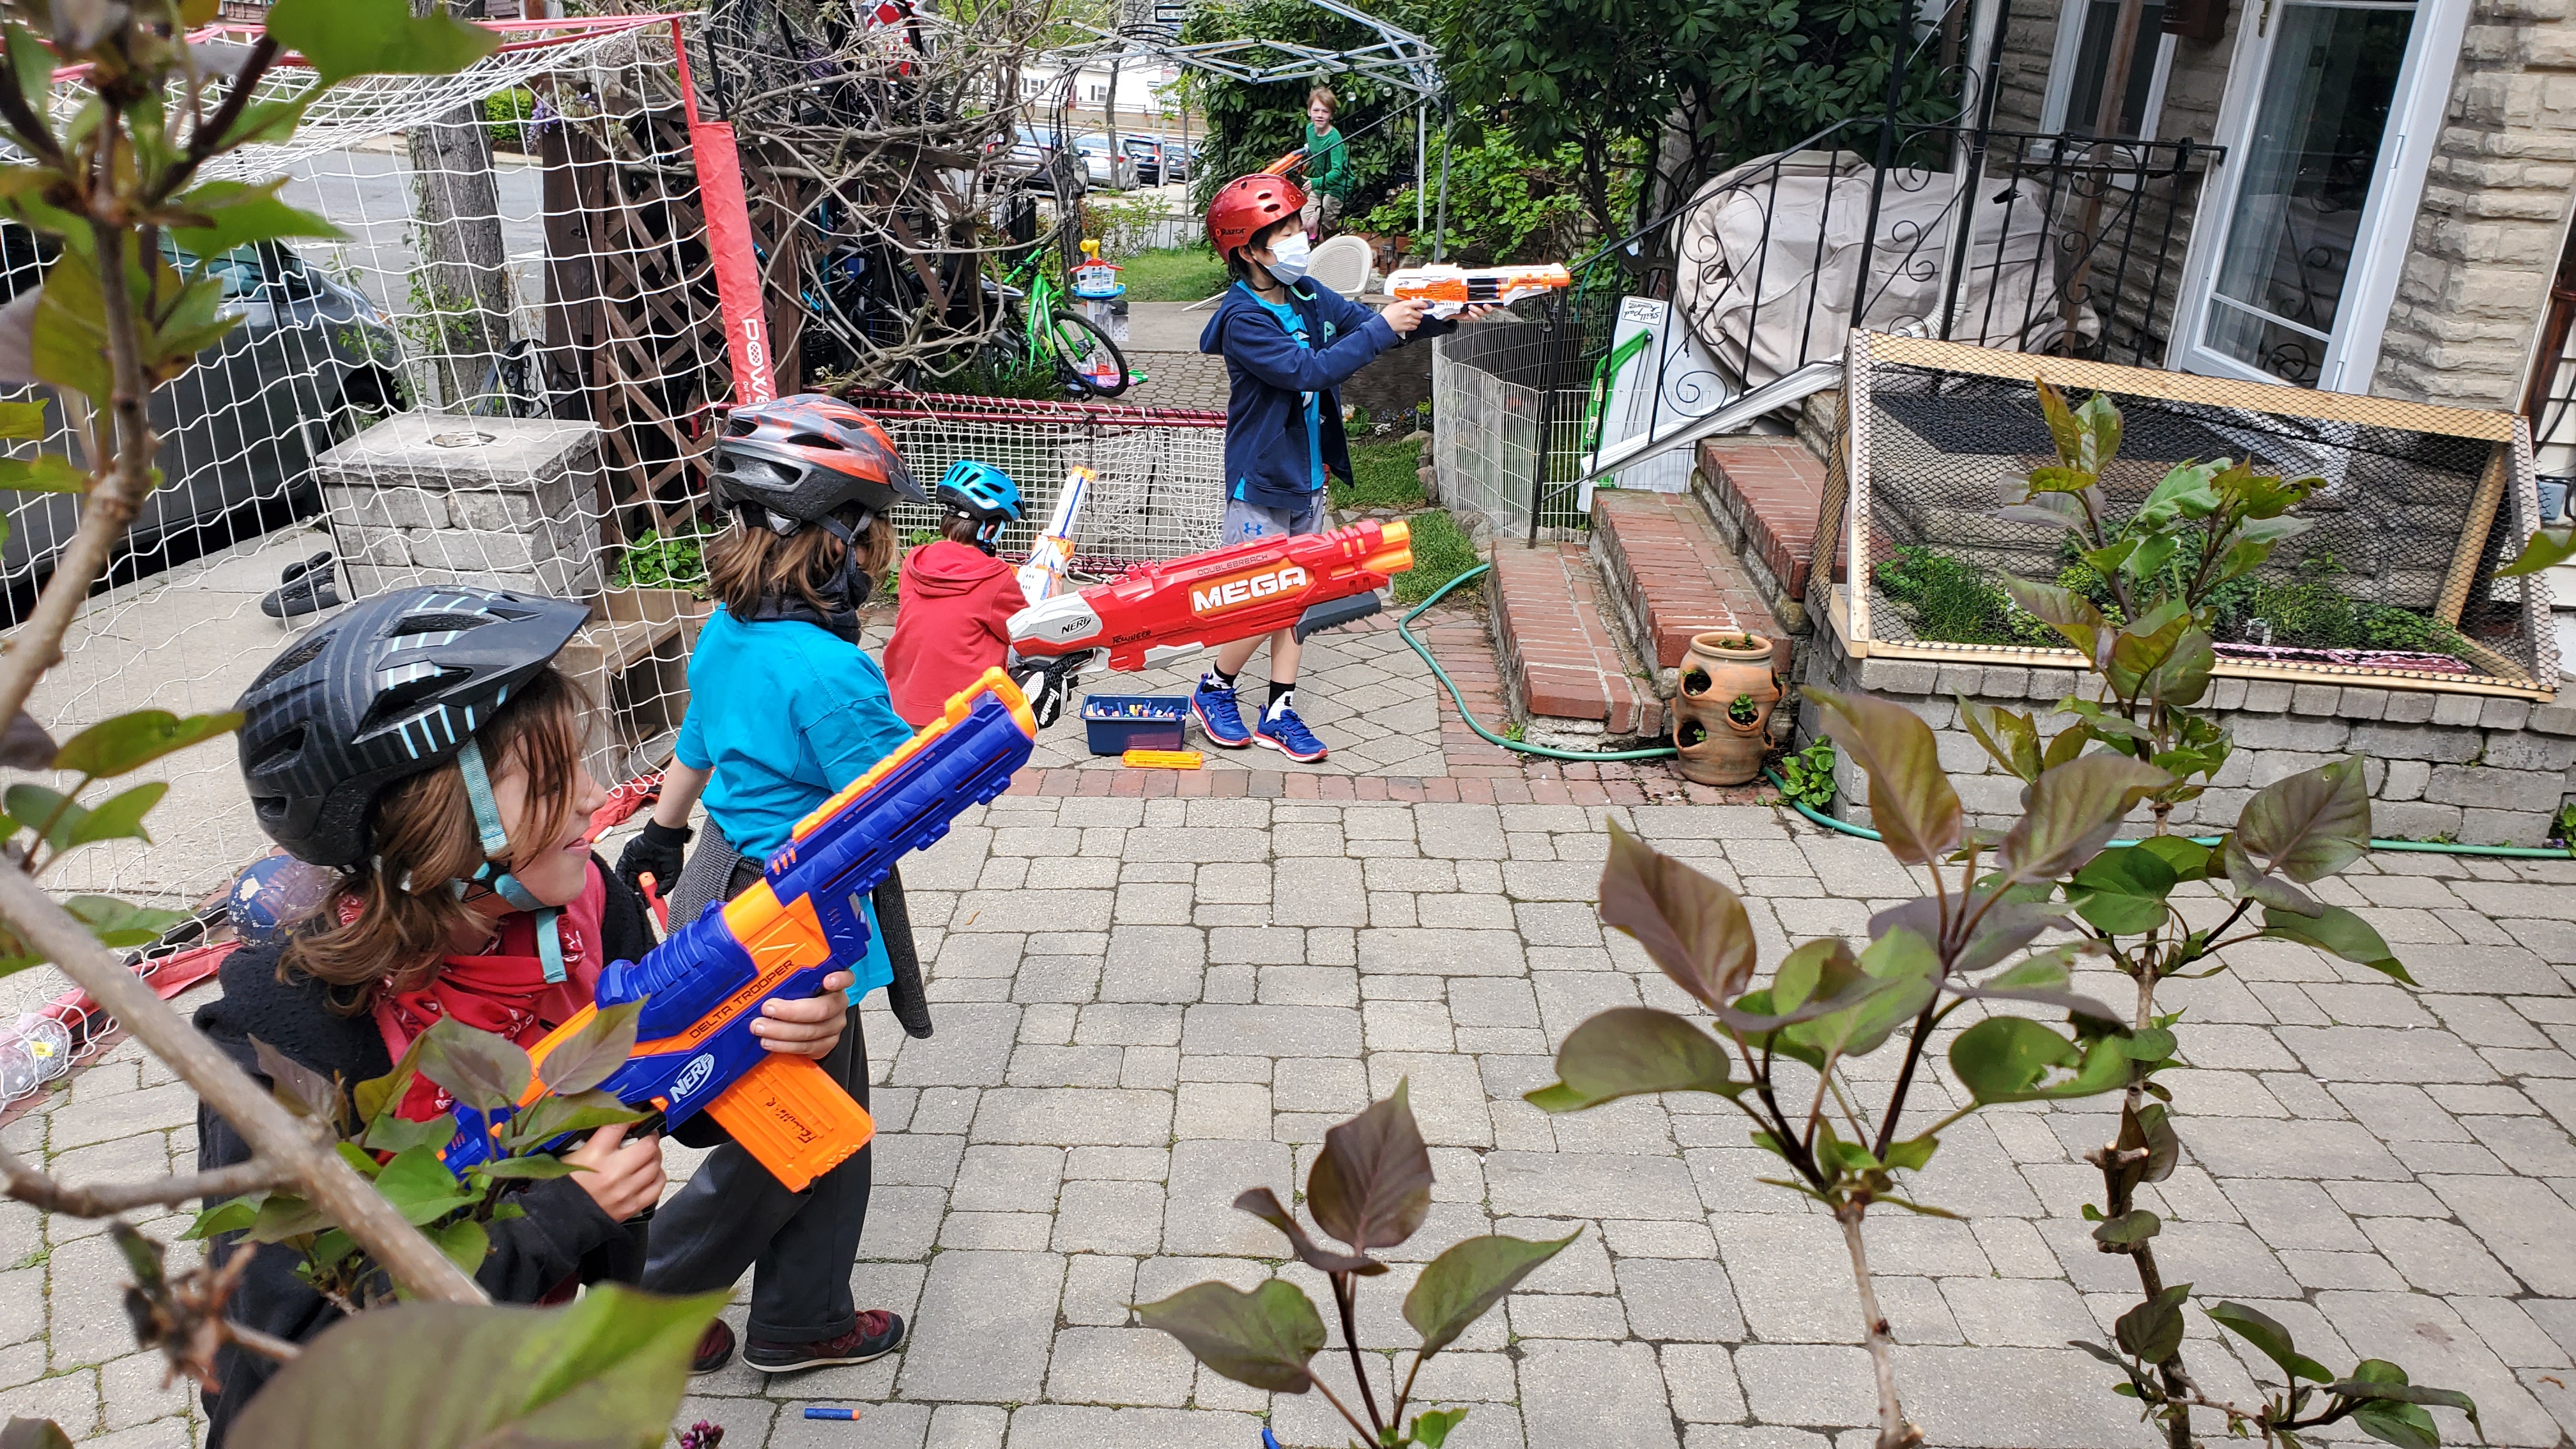 Nerf war on the pandemic birthday bicycle parade